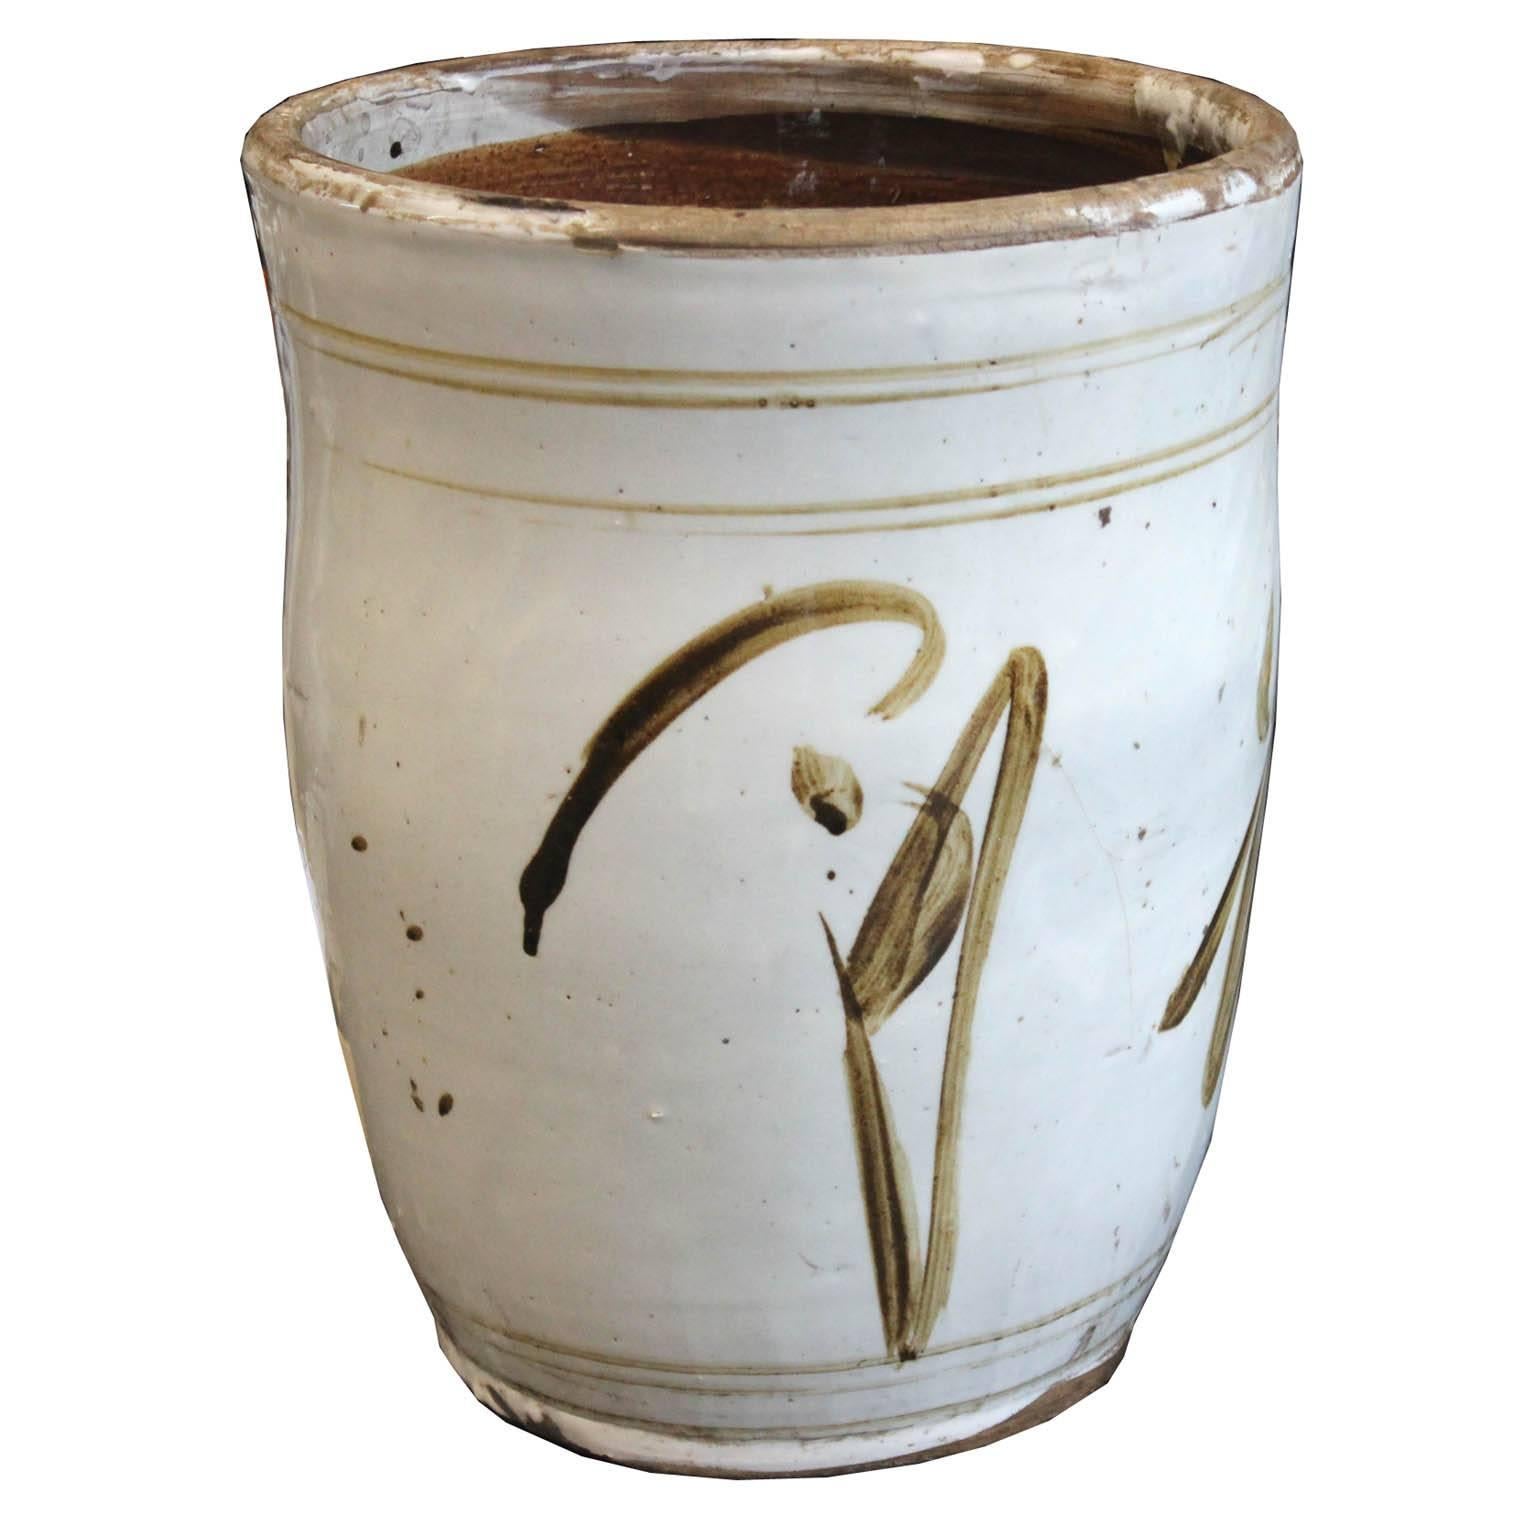 Cream color pottery was used to store grain for a household. A perfect container for a plants, orchids or magazines. From China's Shanxi province, circa 1890s.